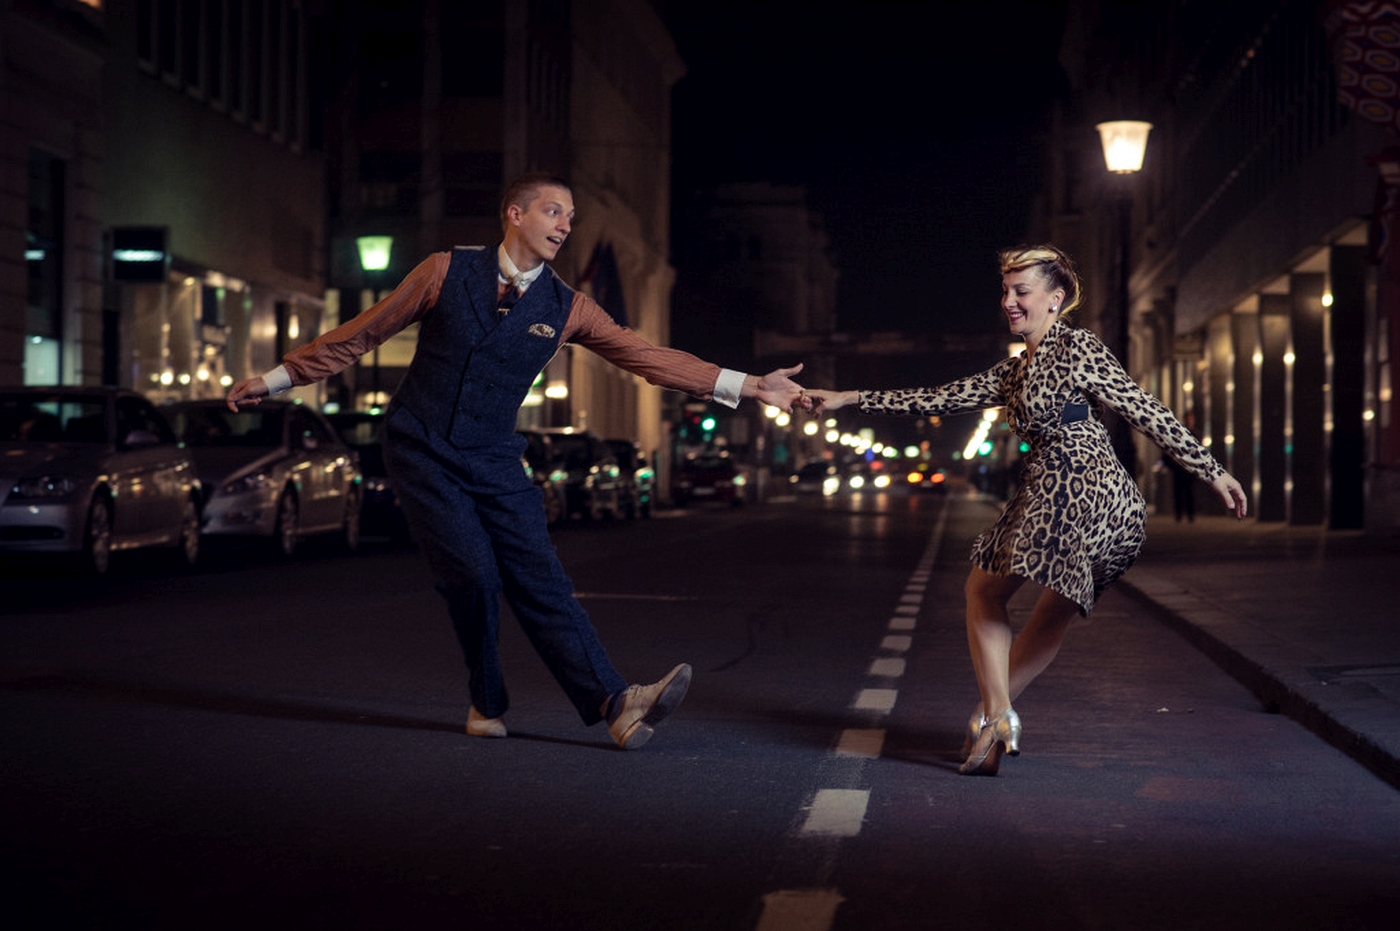 Pontus and Isabella lindy hop TITLE